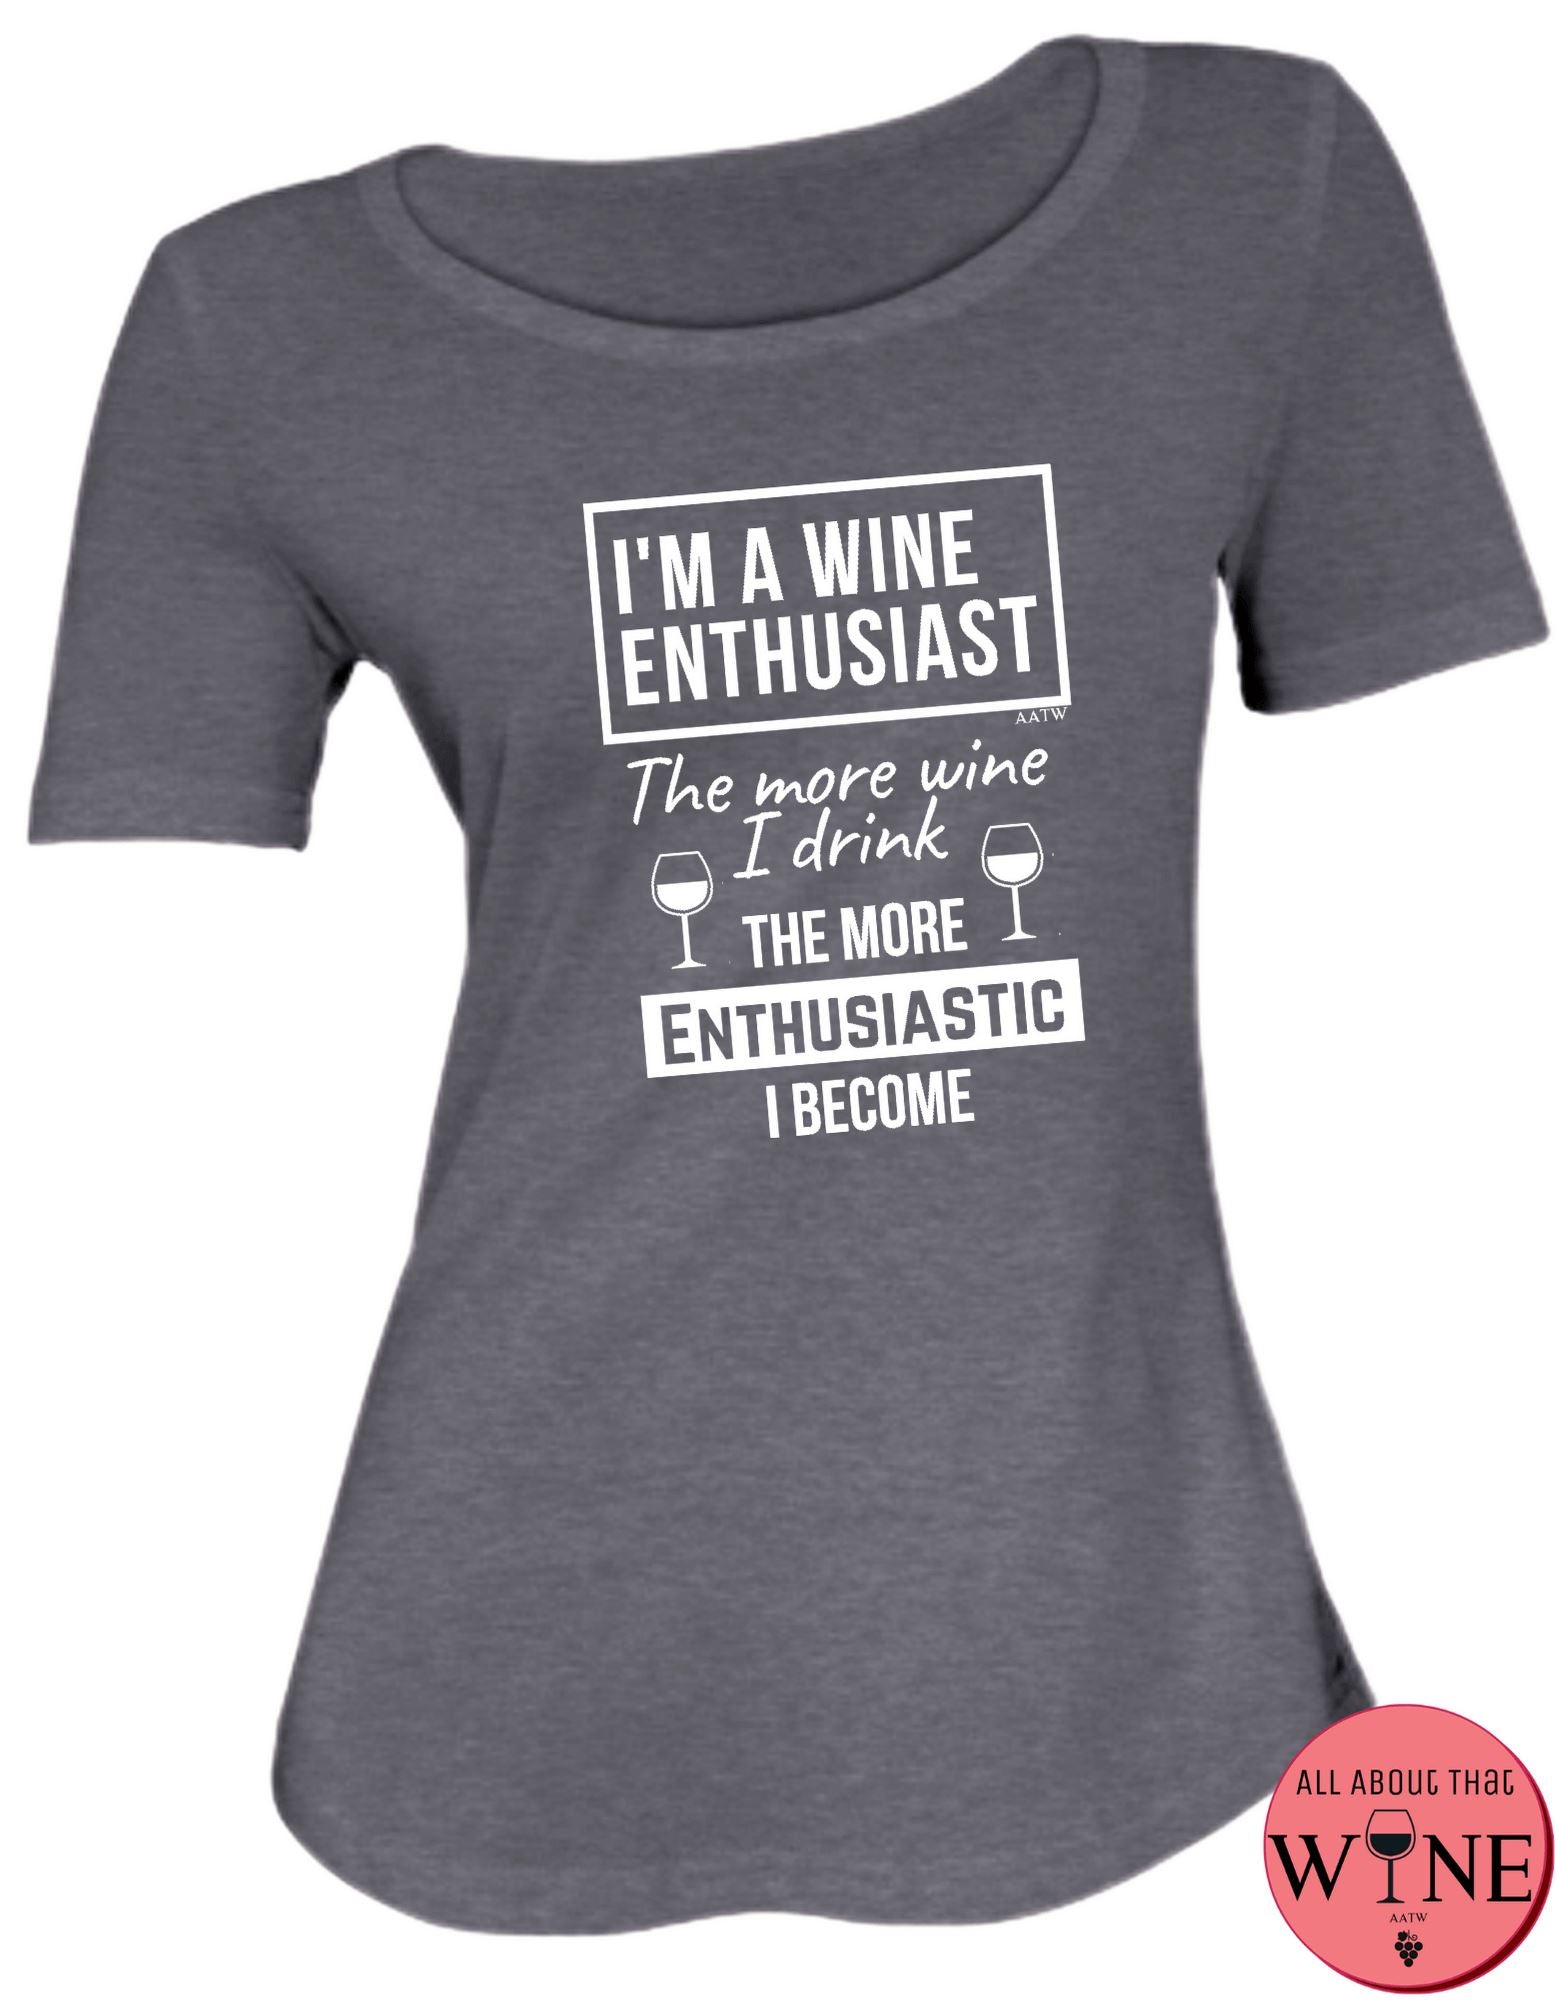 I'm A Wine Enthusiast S Charcoal melange with white